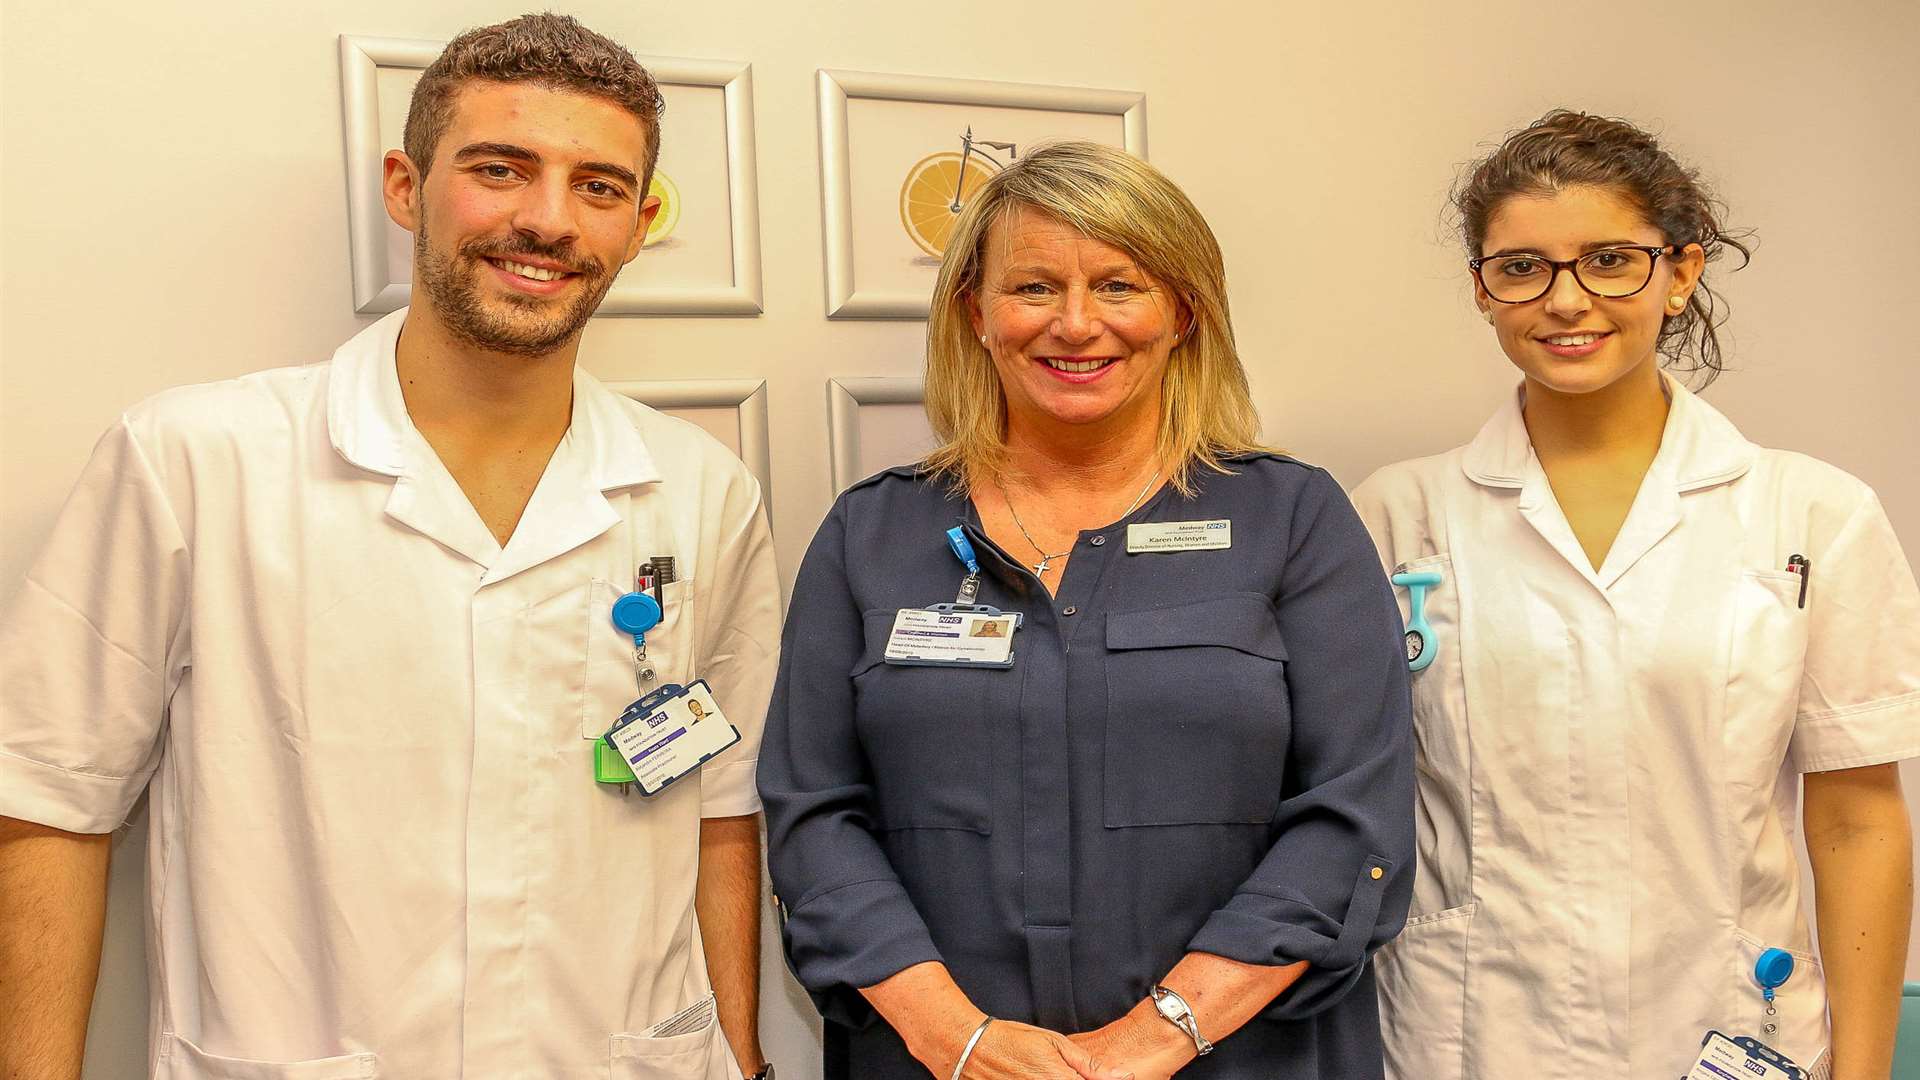 Nurses Alejandro Ferrera and Angela Cayon, with Karen McIntyre (centre) Deputy Director of Nursing for Women and Children's Services.